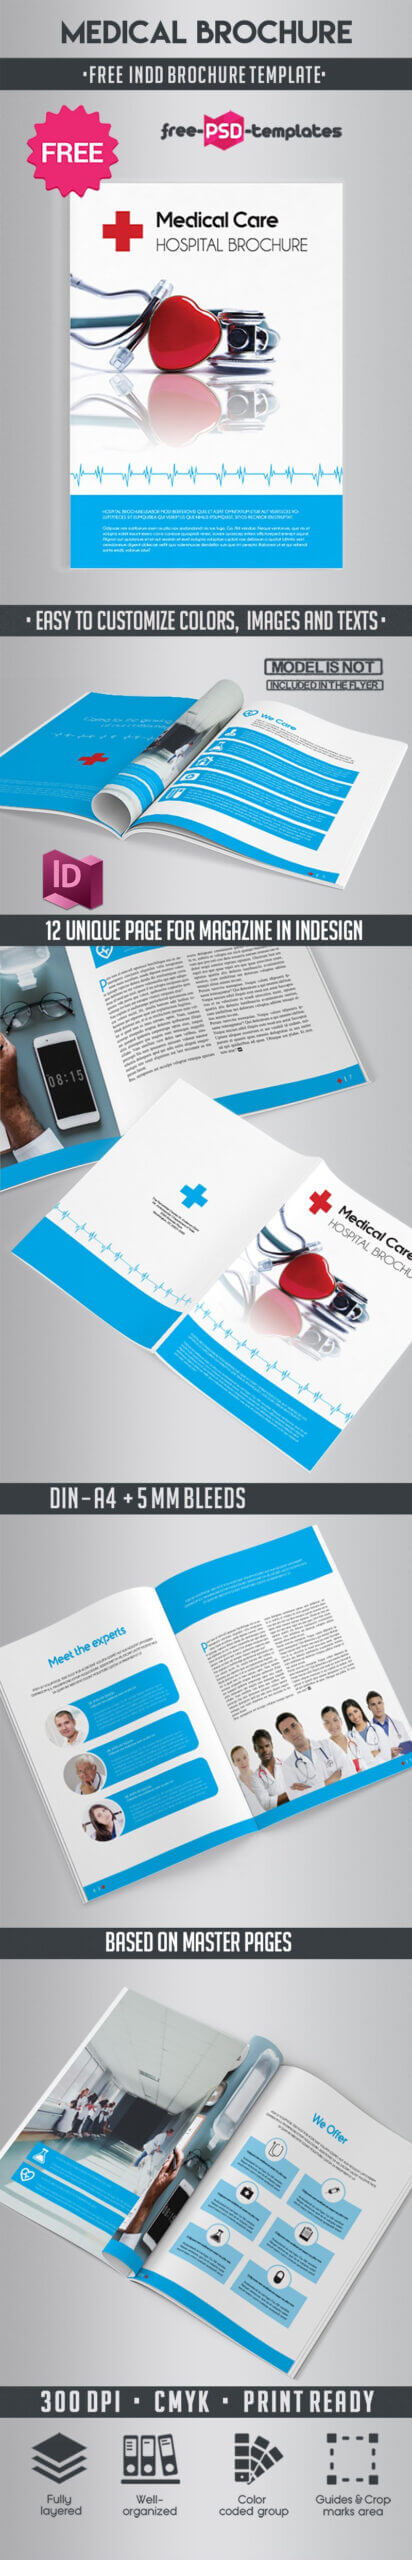 Free Medical Brochure Indd Template | Free Psd Templates For Brochure Template Indesign Free Download